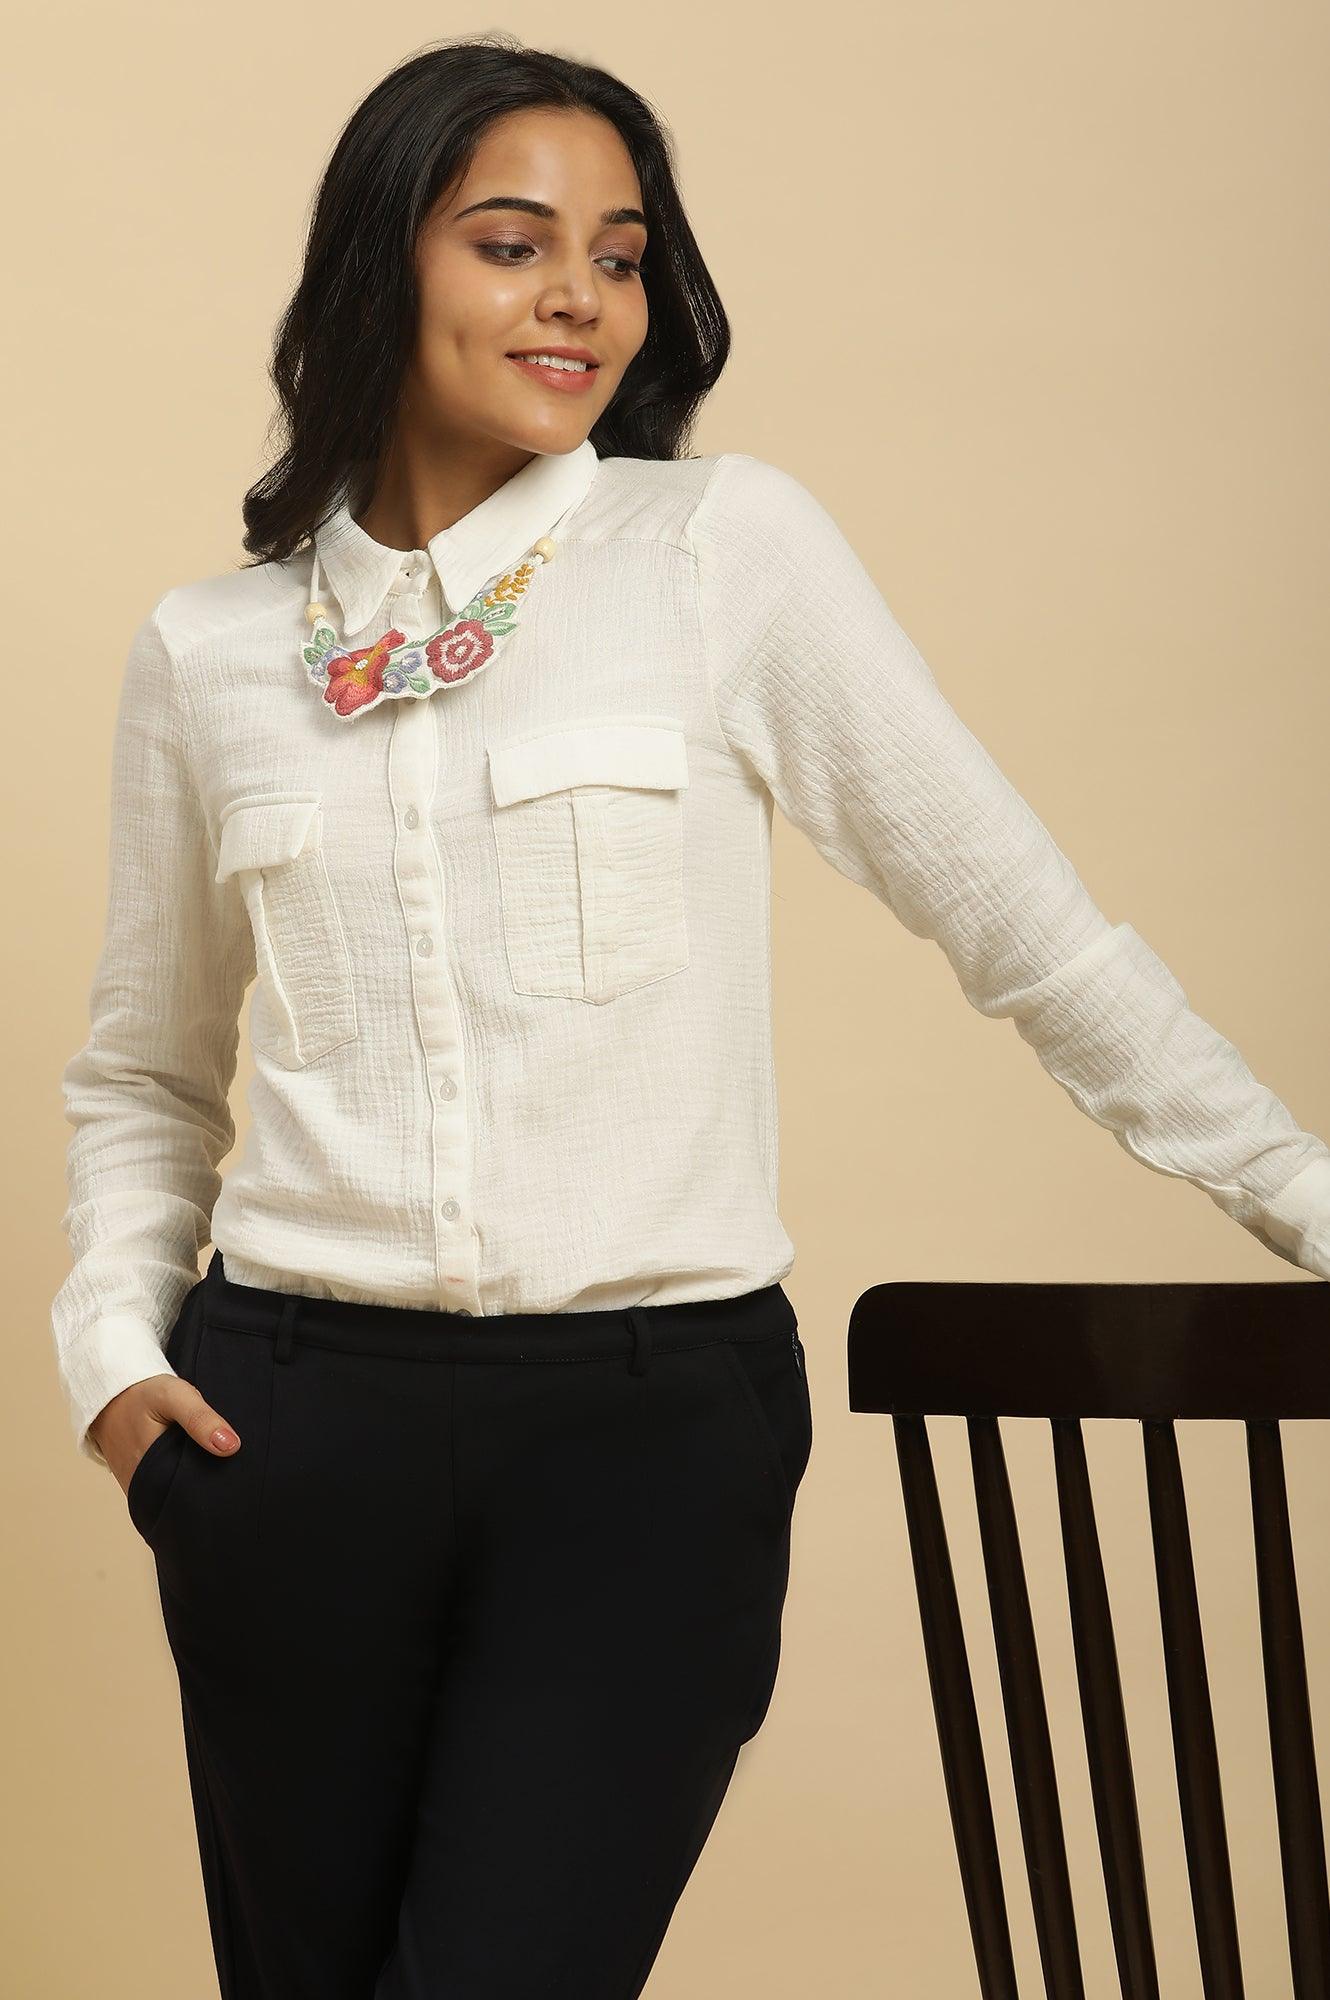 Ecru Button Down Shirt With Embroidered Neck Piece - wforwoman